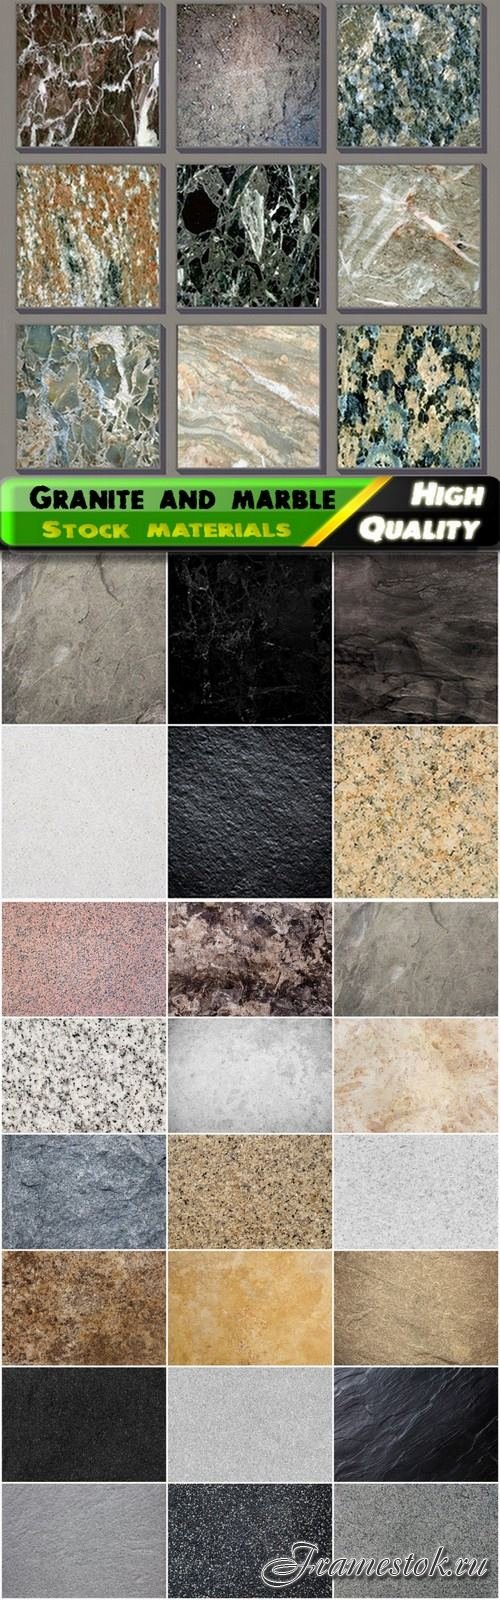 Granite textures and marble backgrounds - 25 HQ Jpg